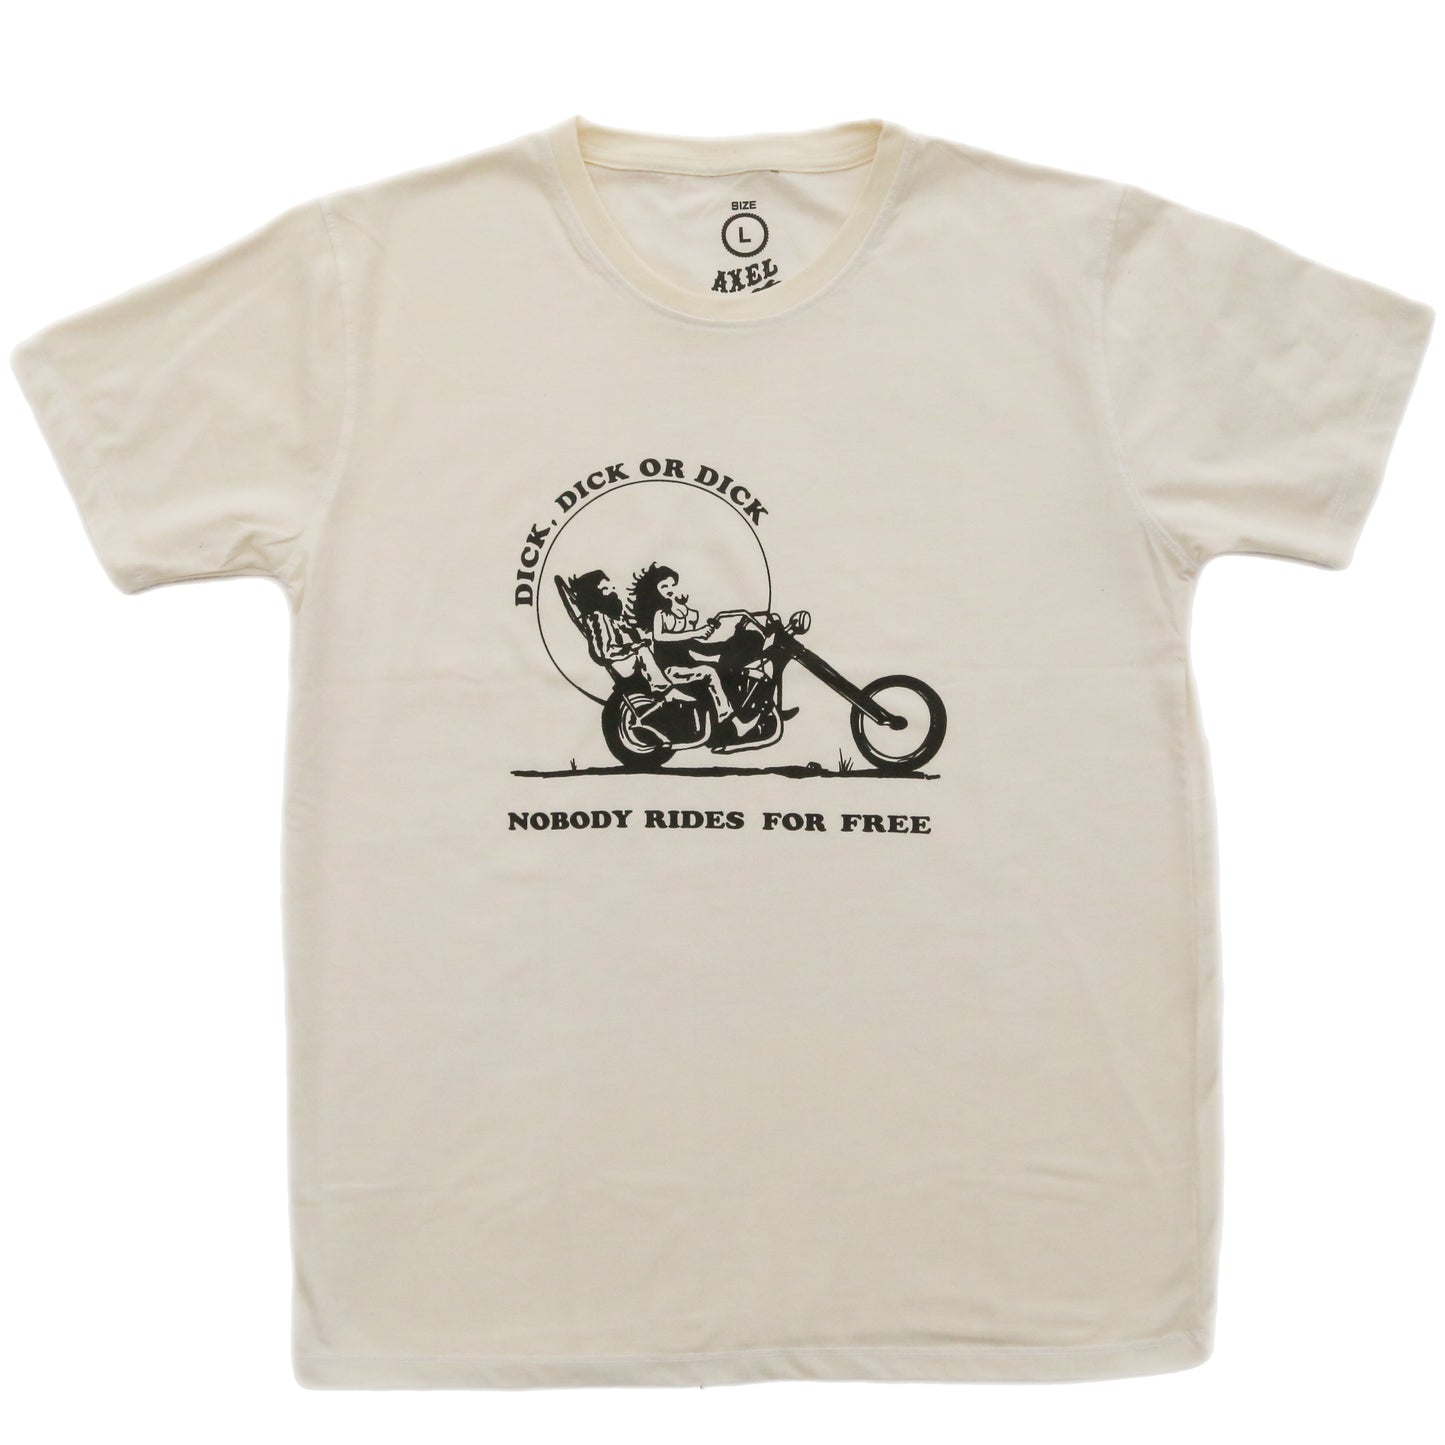 Axel Co  "Nobody Rides For Free" Motorcycle T-Shirt